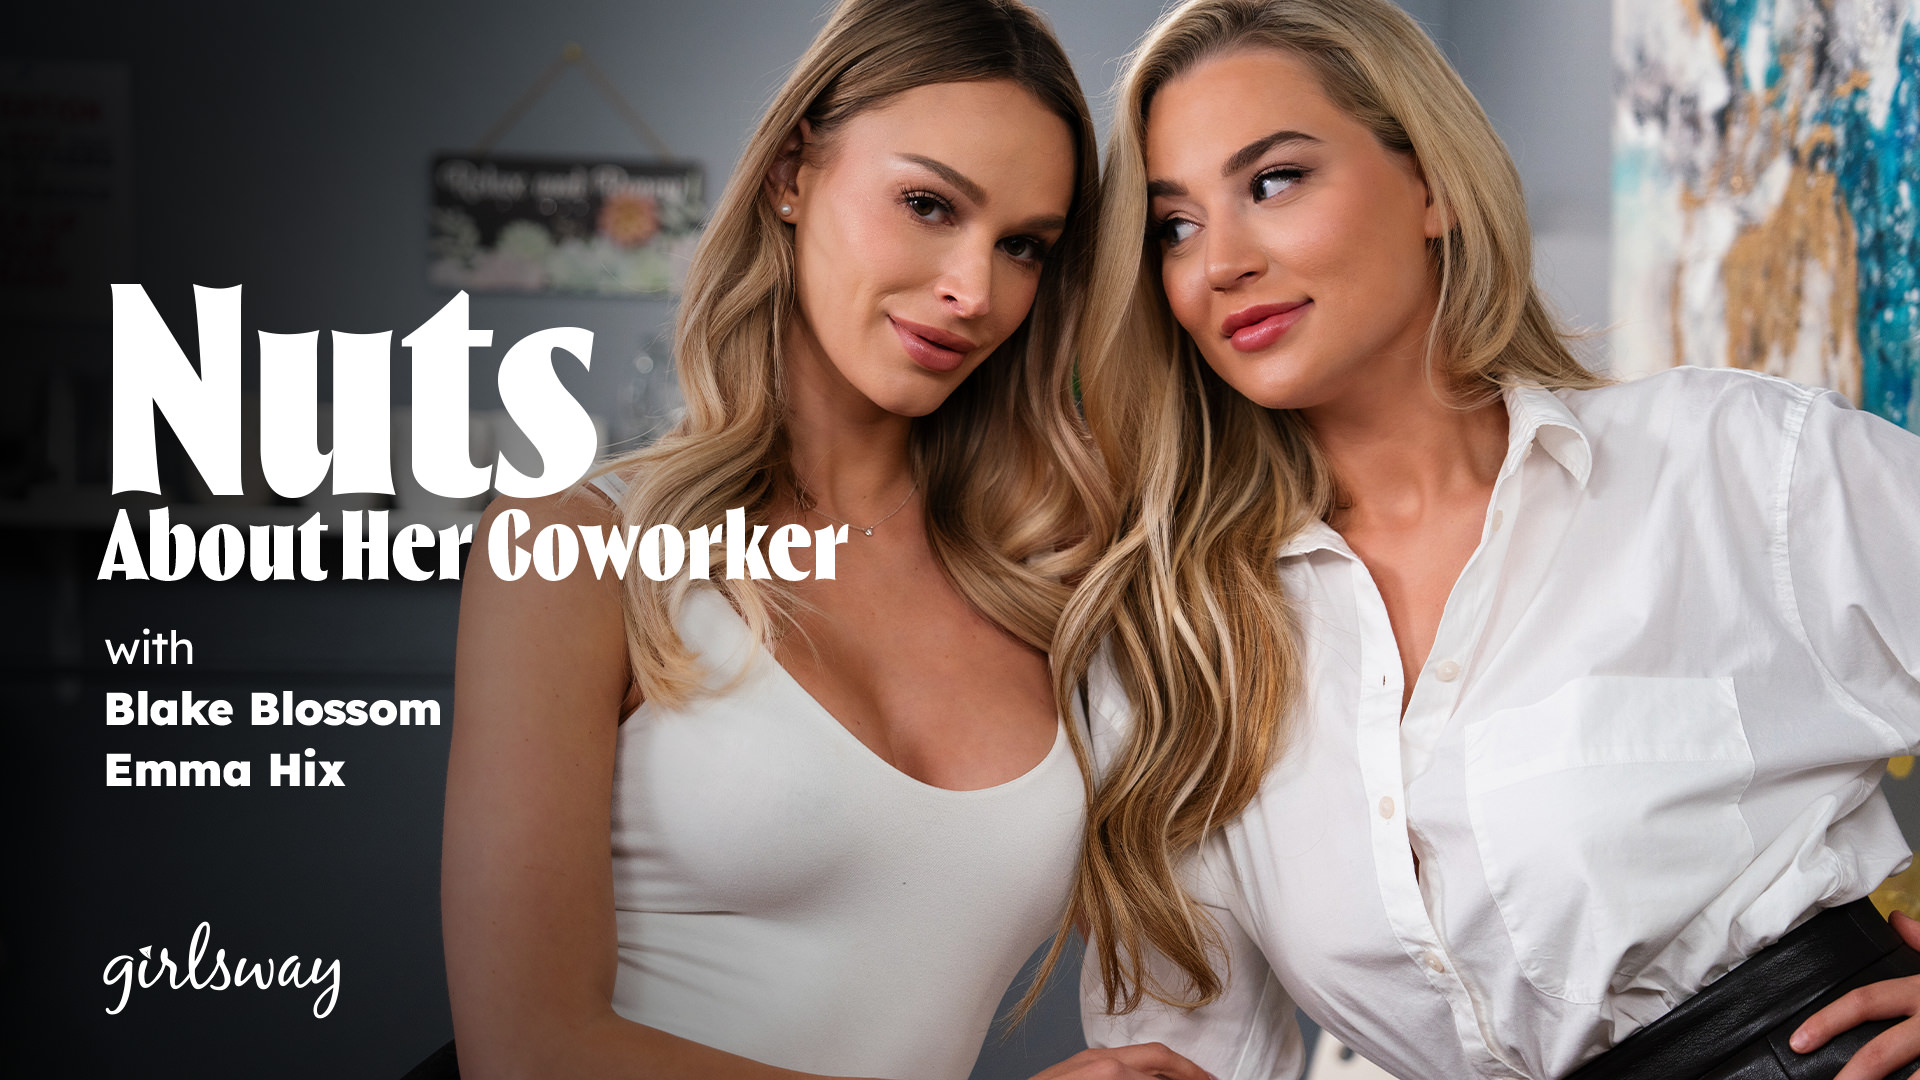 Emma Hix, Blake Blossom “Nuts About Her Coworker” GirlsWay